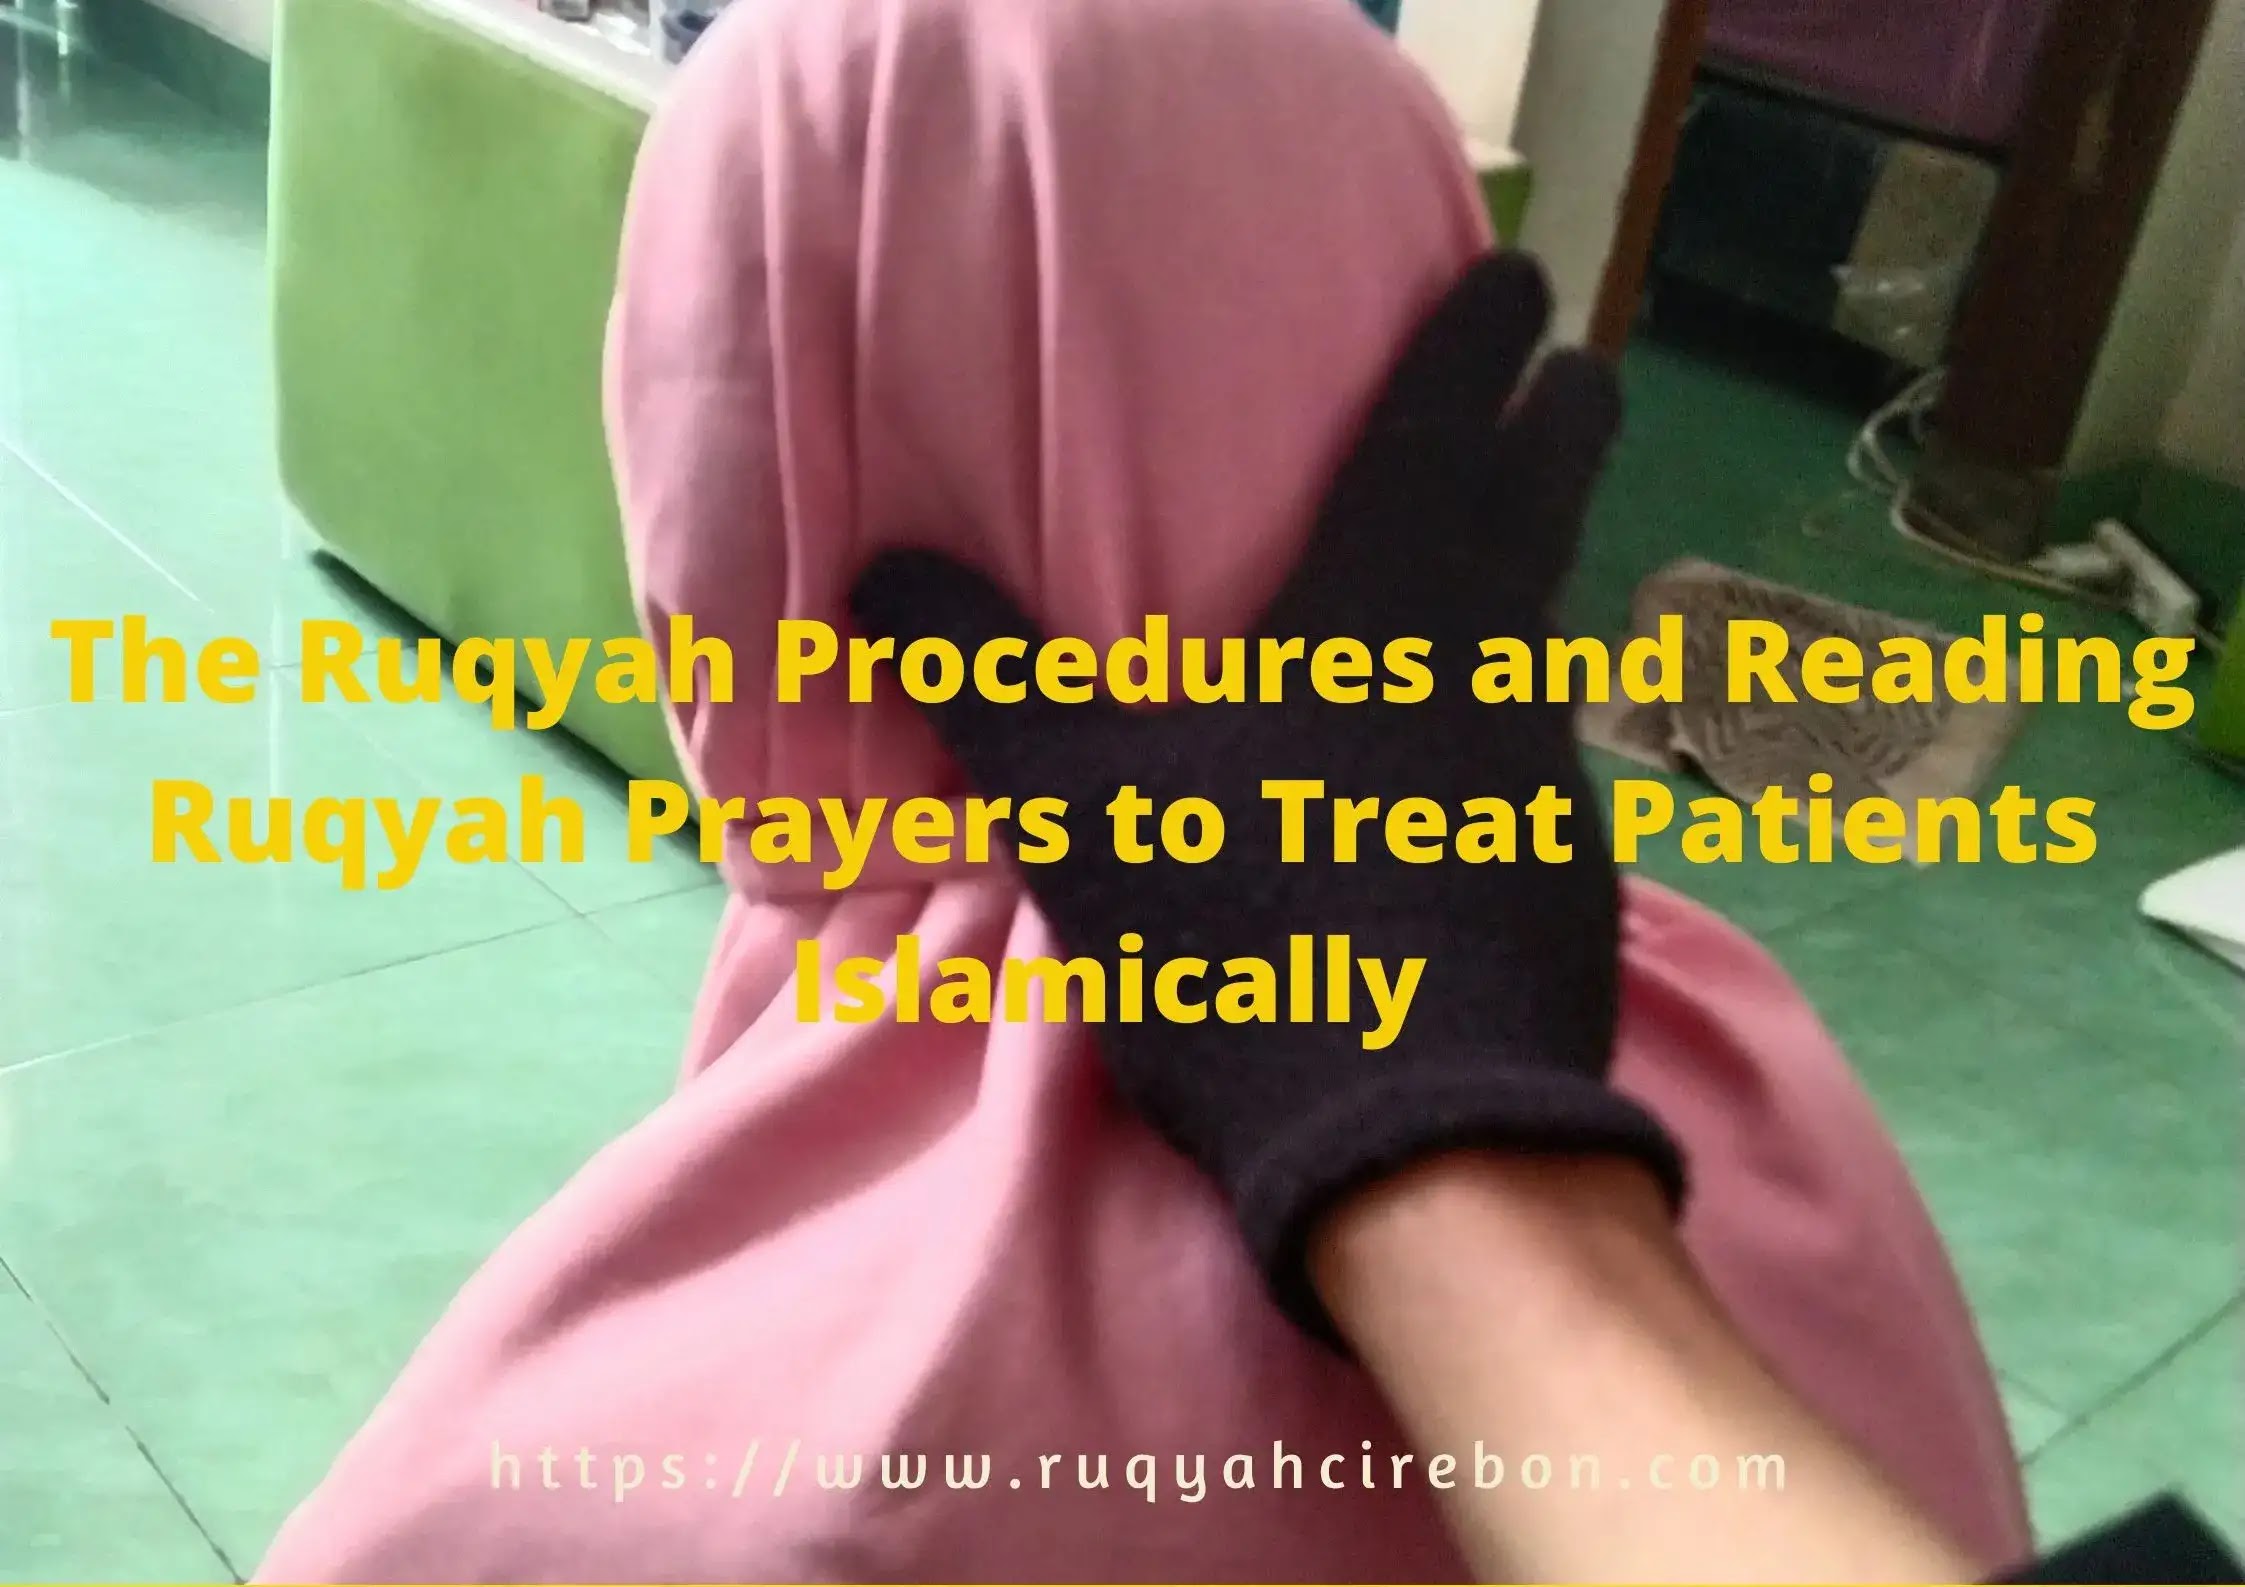 Ruqyah Procedures and Reading Ruqyah Prayers to Treat Patients Islamically, Don't Get It Wrong